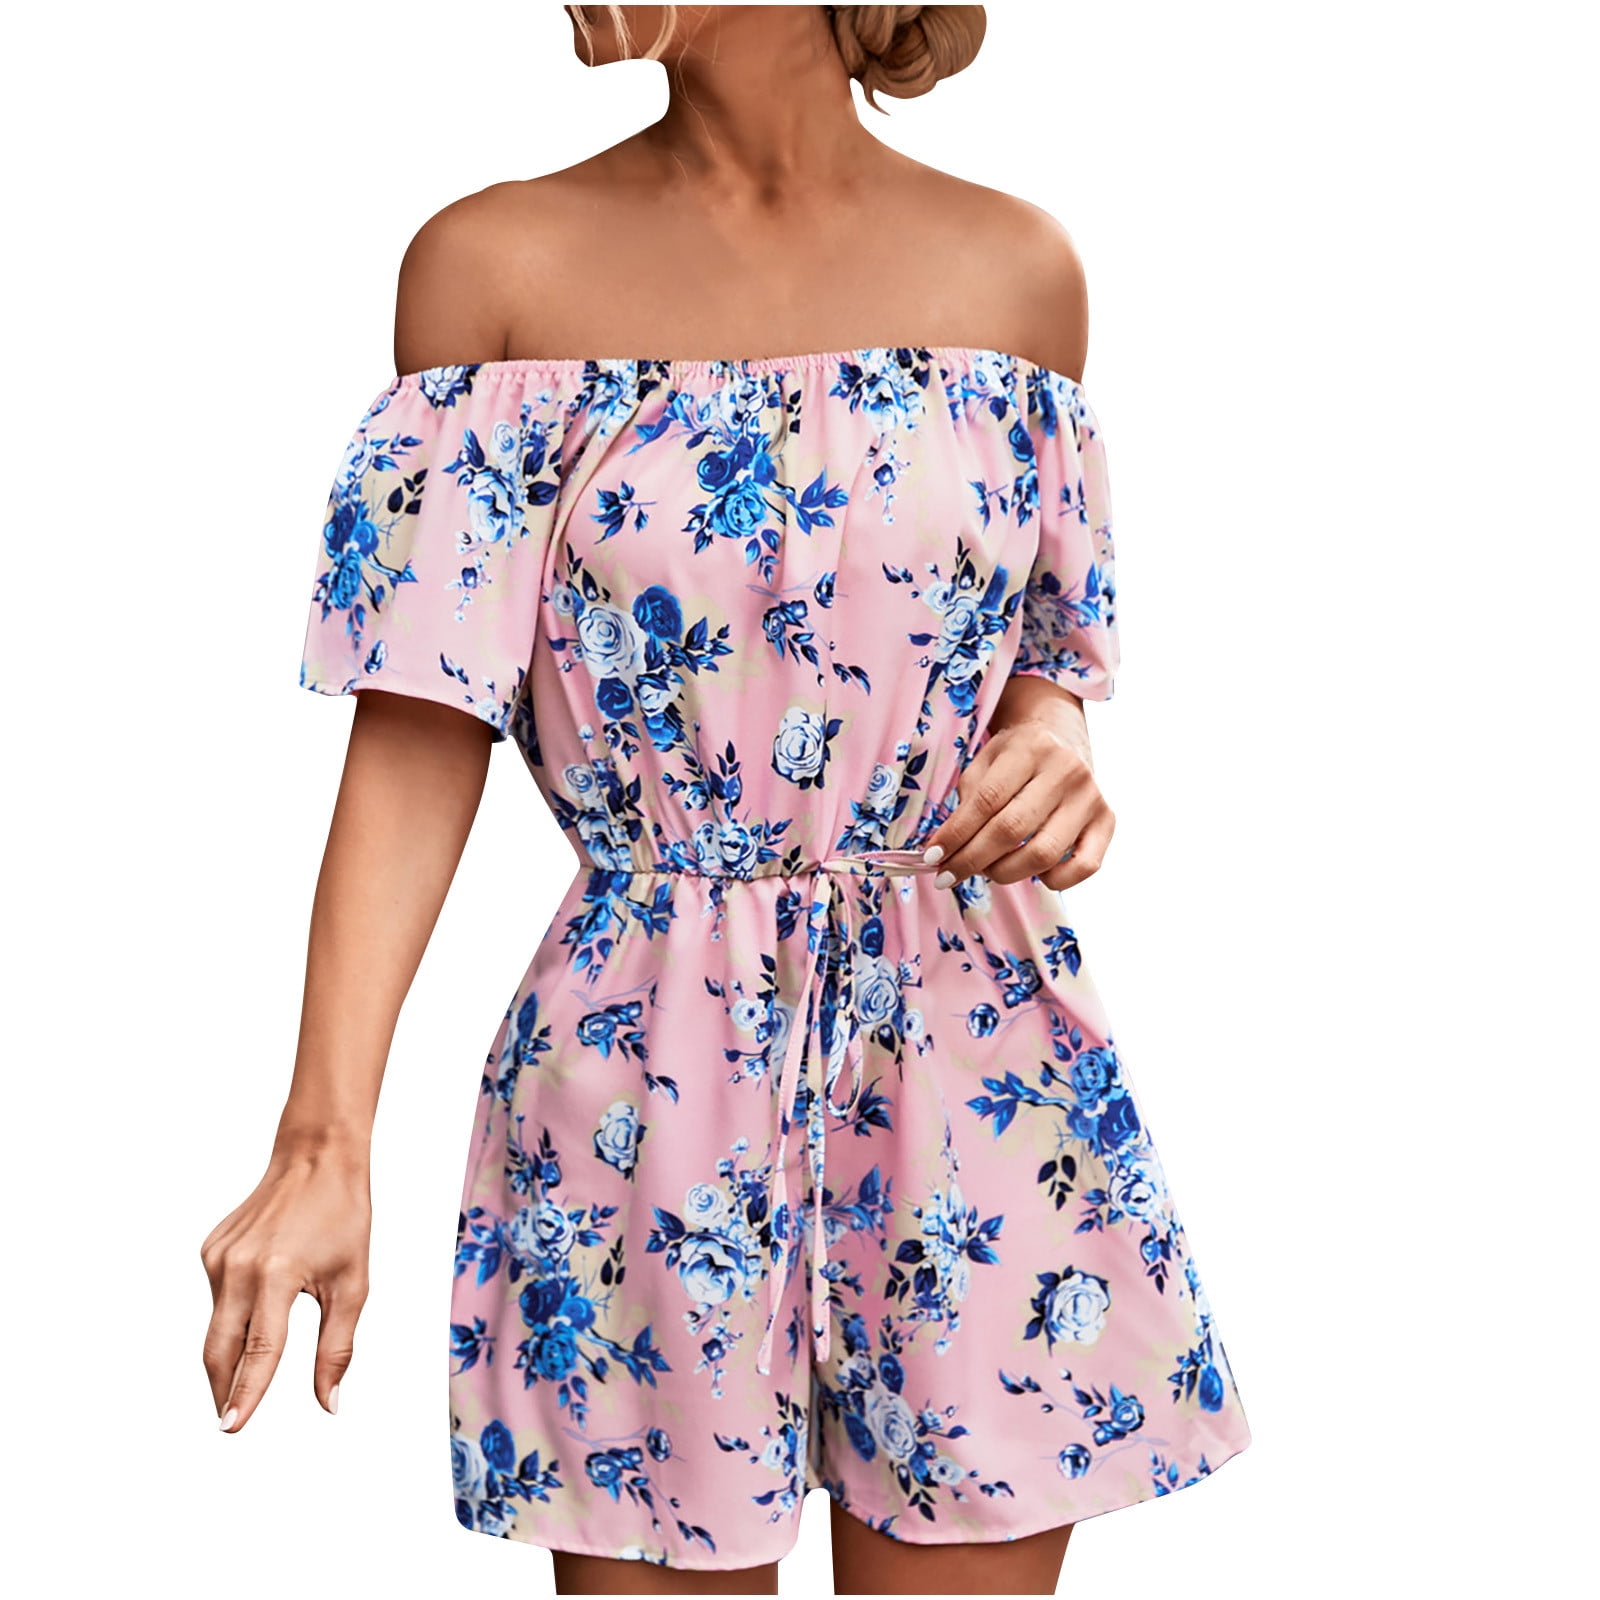 Women Off Shoulder Ruffle Floral Printed Jumpsuit Playsuits Summer Casual Sexy Short Sleeve Rompers -